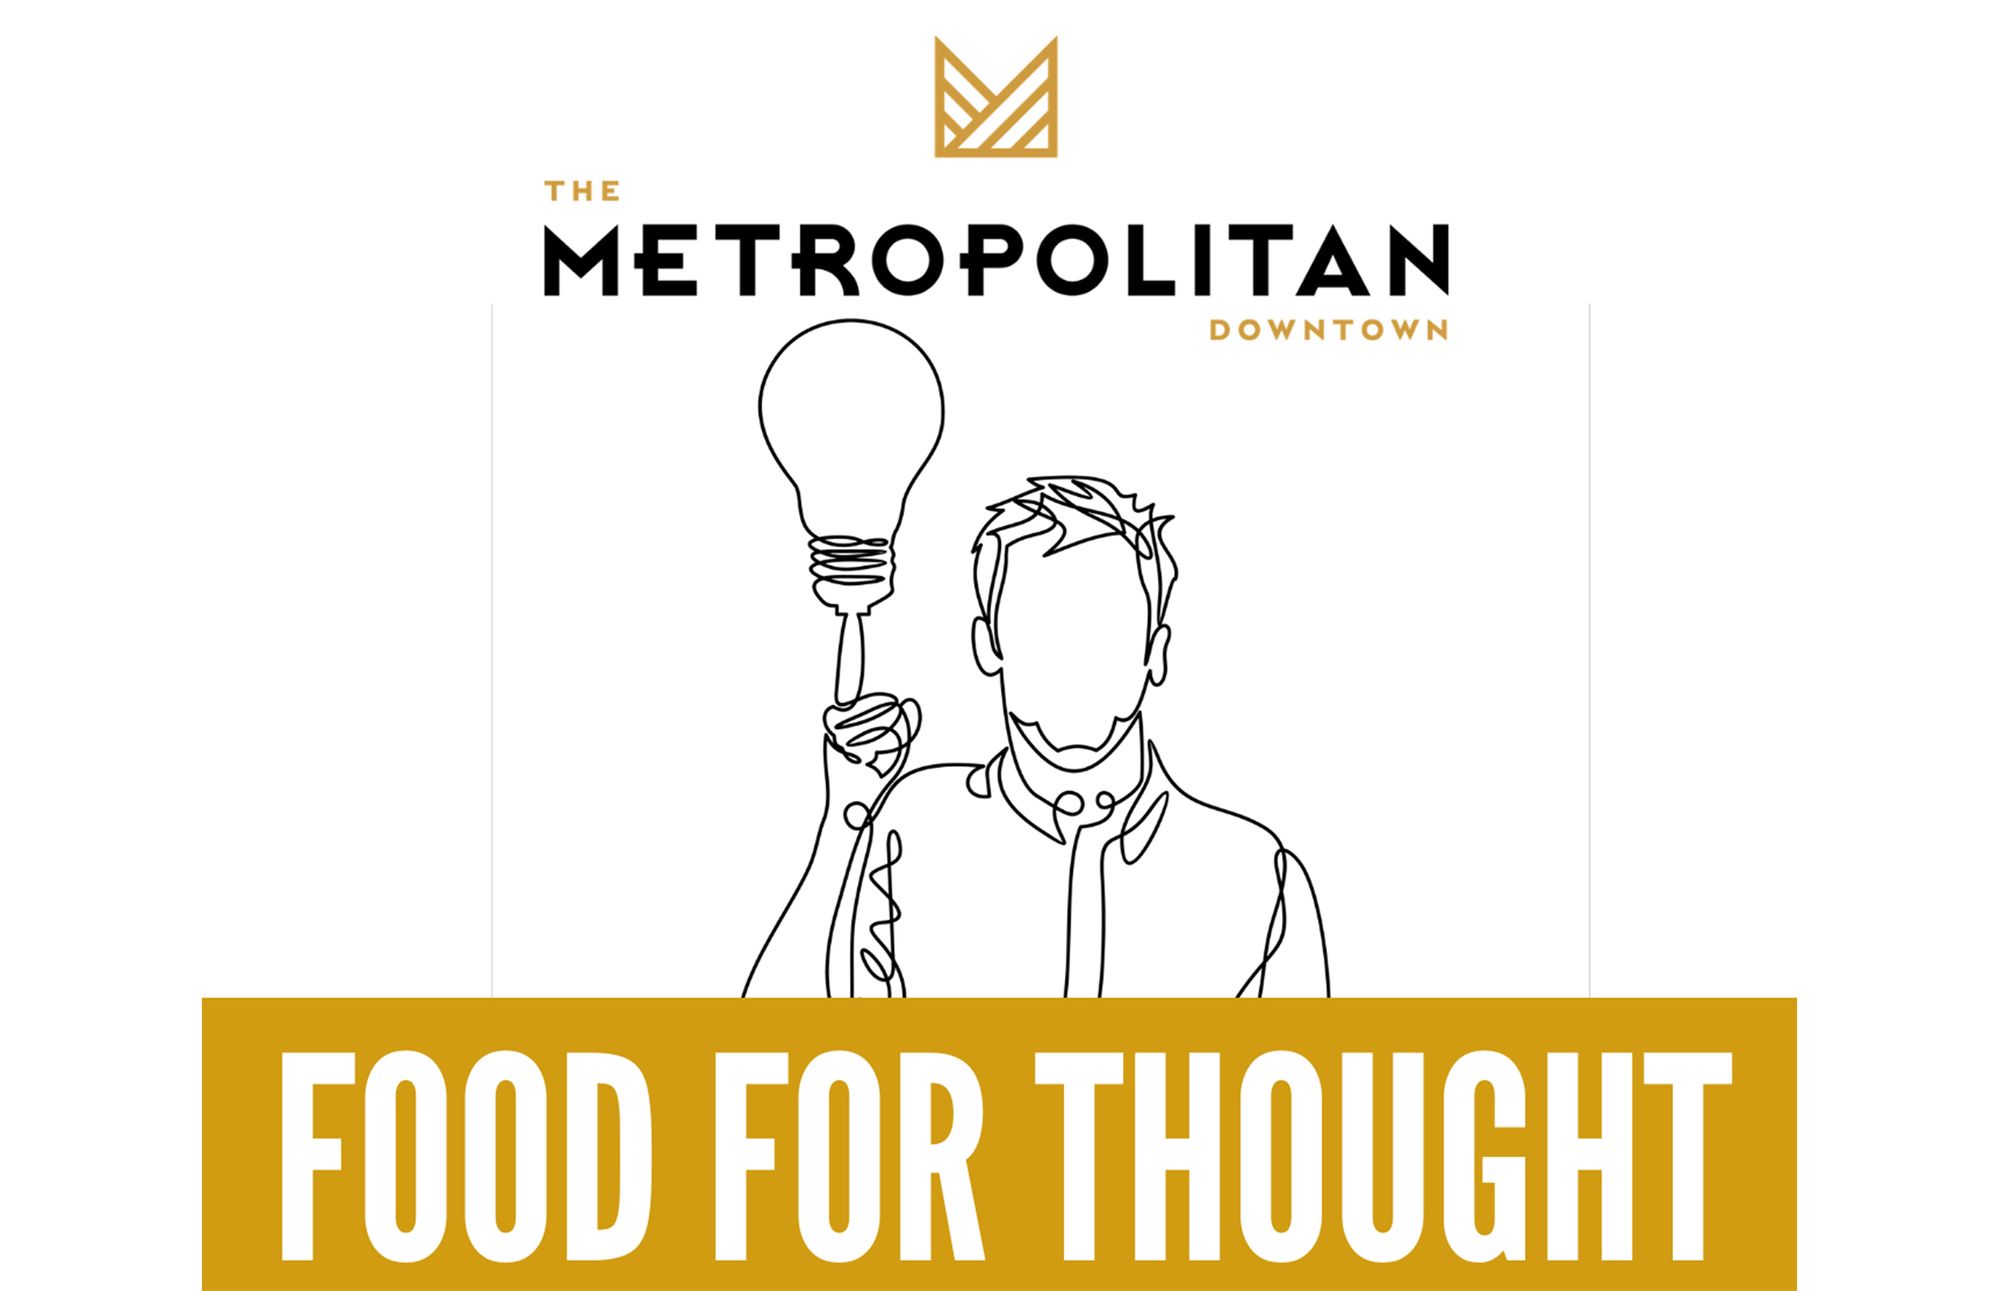 Check It Out! Food For Thought - An Innovative Lunch Series